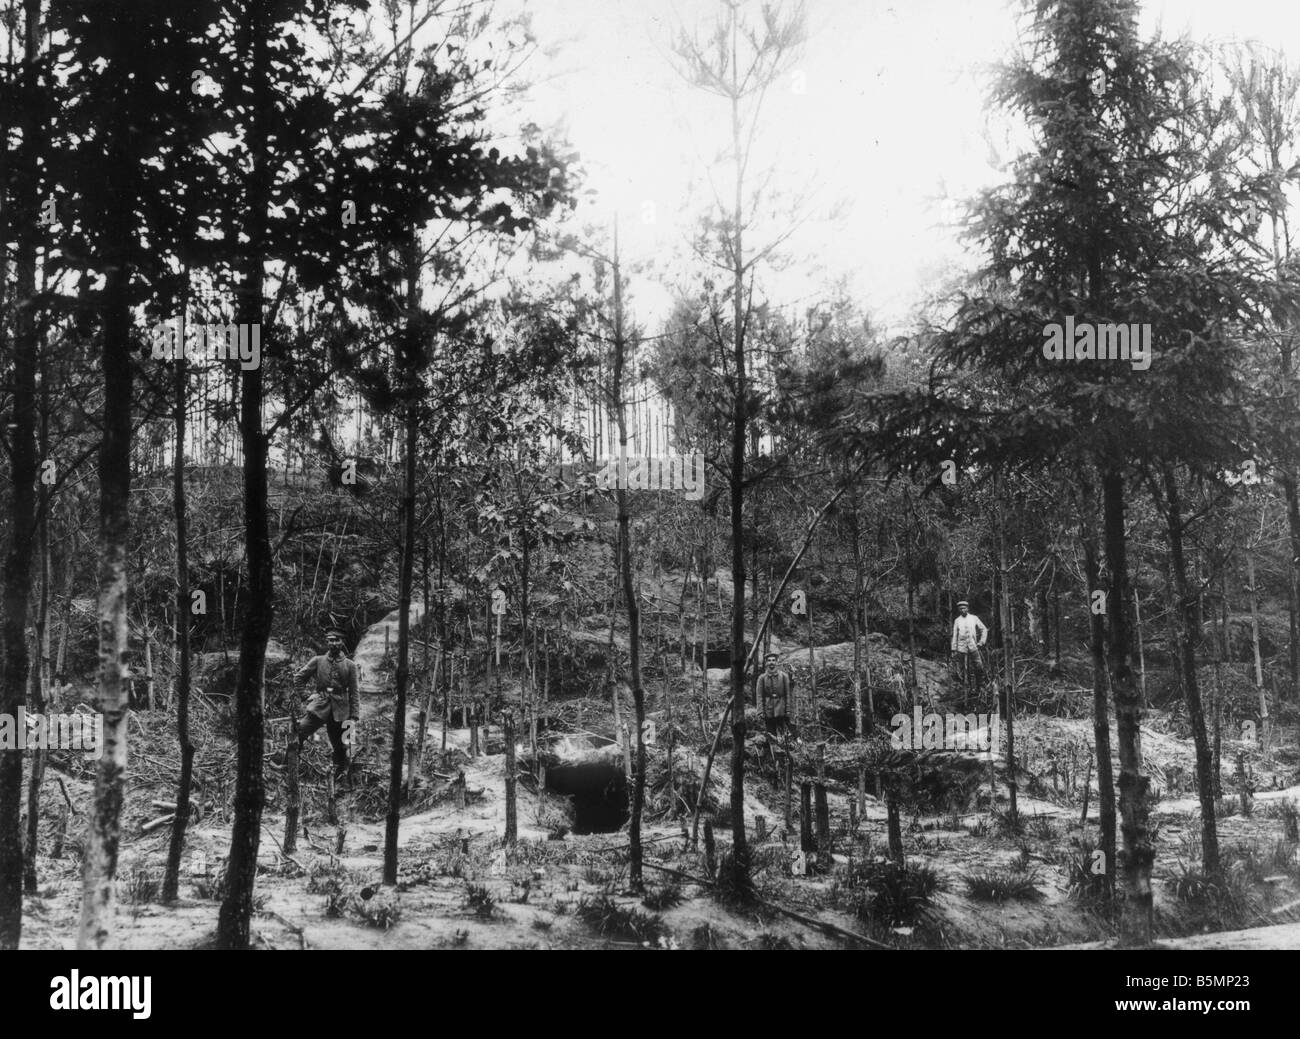 Earth holes in wood World War 1 World War 1 1914 18 Earth holes shelters in a desolate woody area Photo F Gerlach Berlin Stock Photo